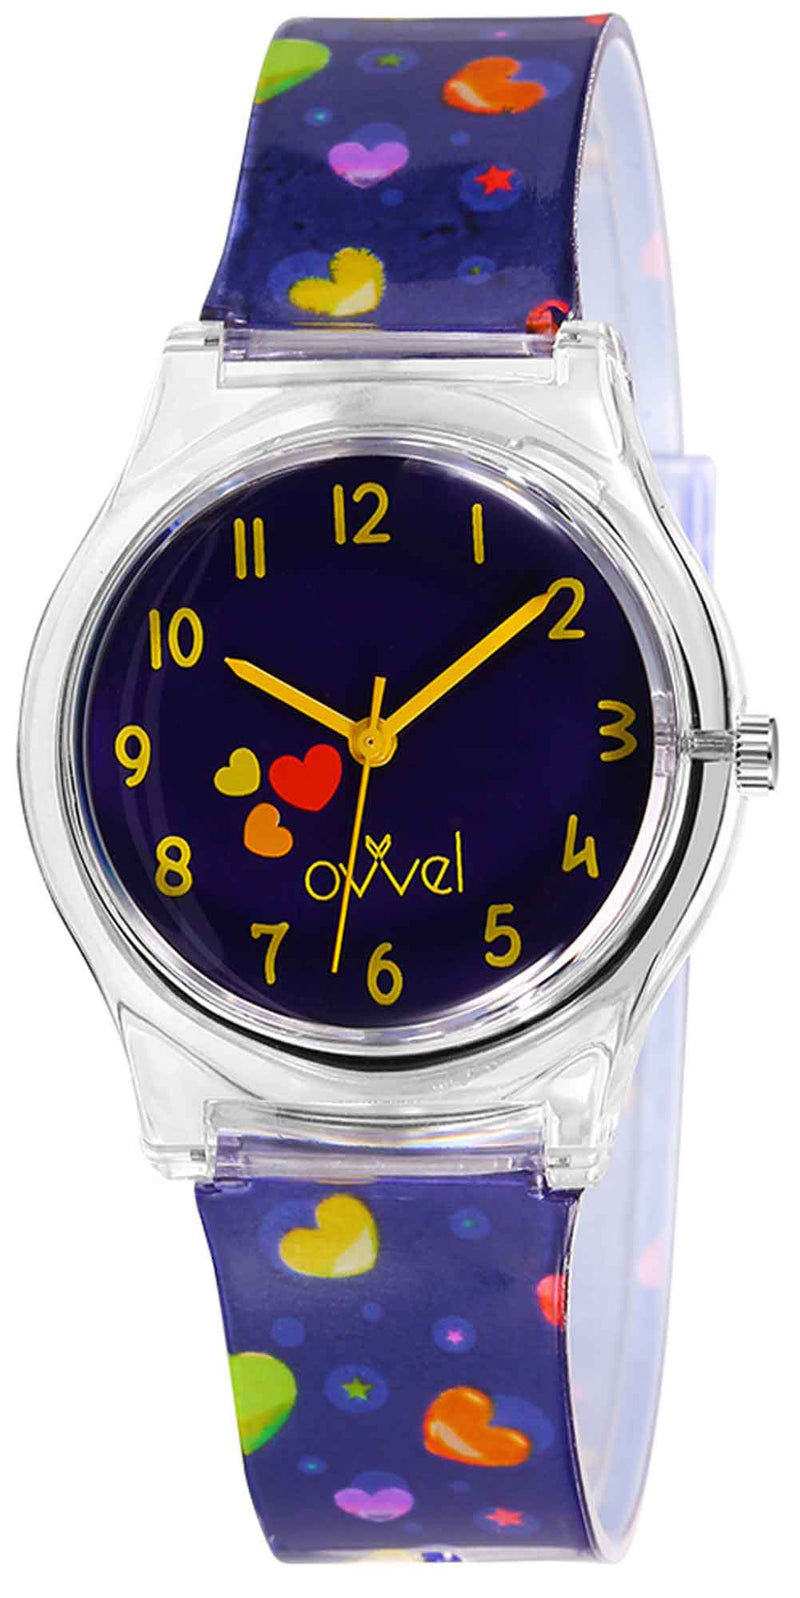 Watches for kids - Hearts